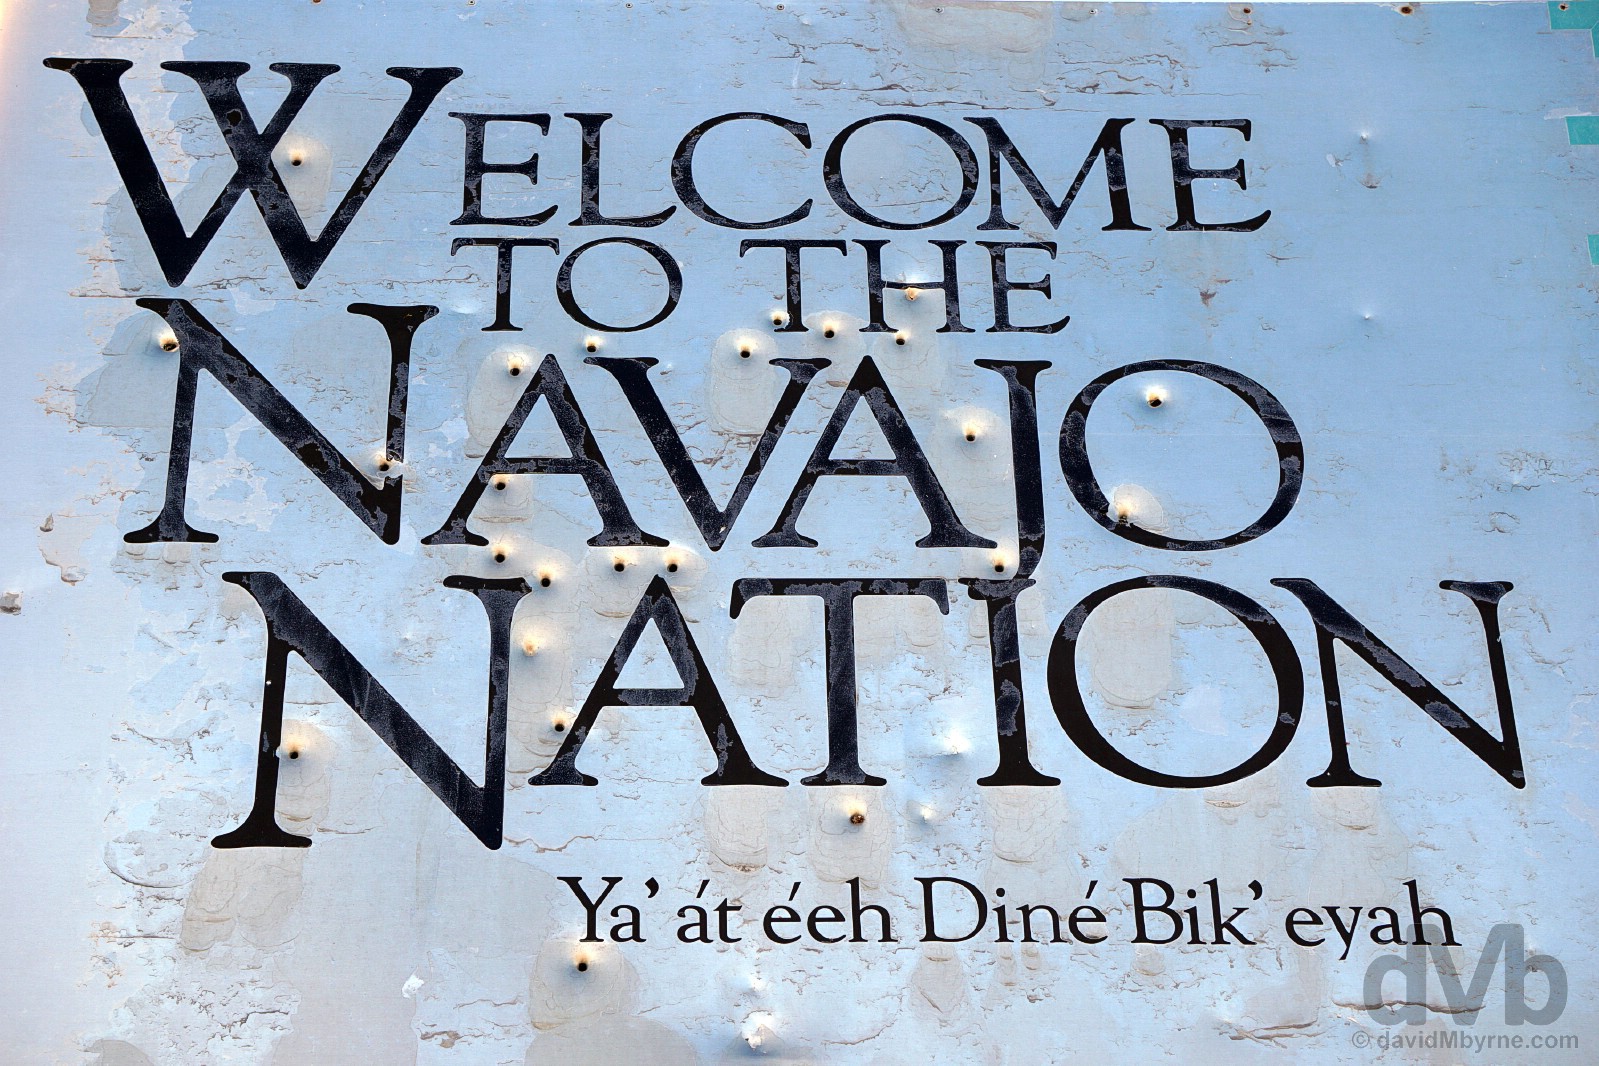 A bullet hole-infused 'Welcome To The Navajo Nation' sign near the Four Corners Monument off US 160 on the New Mexico/Arizona state line. September 10, 2016,